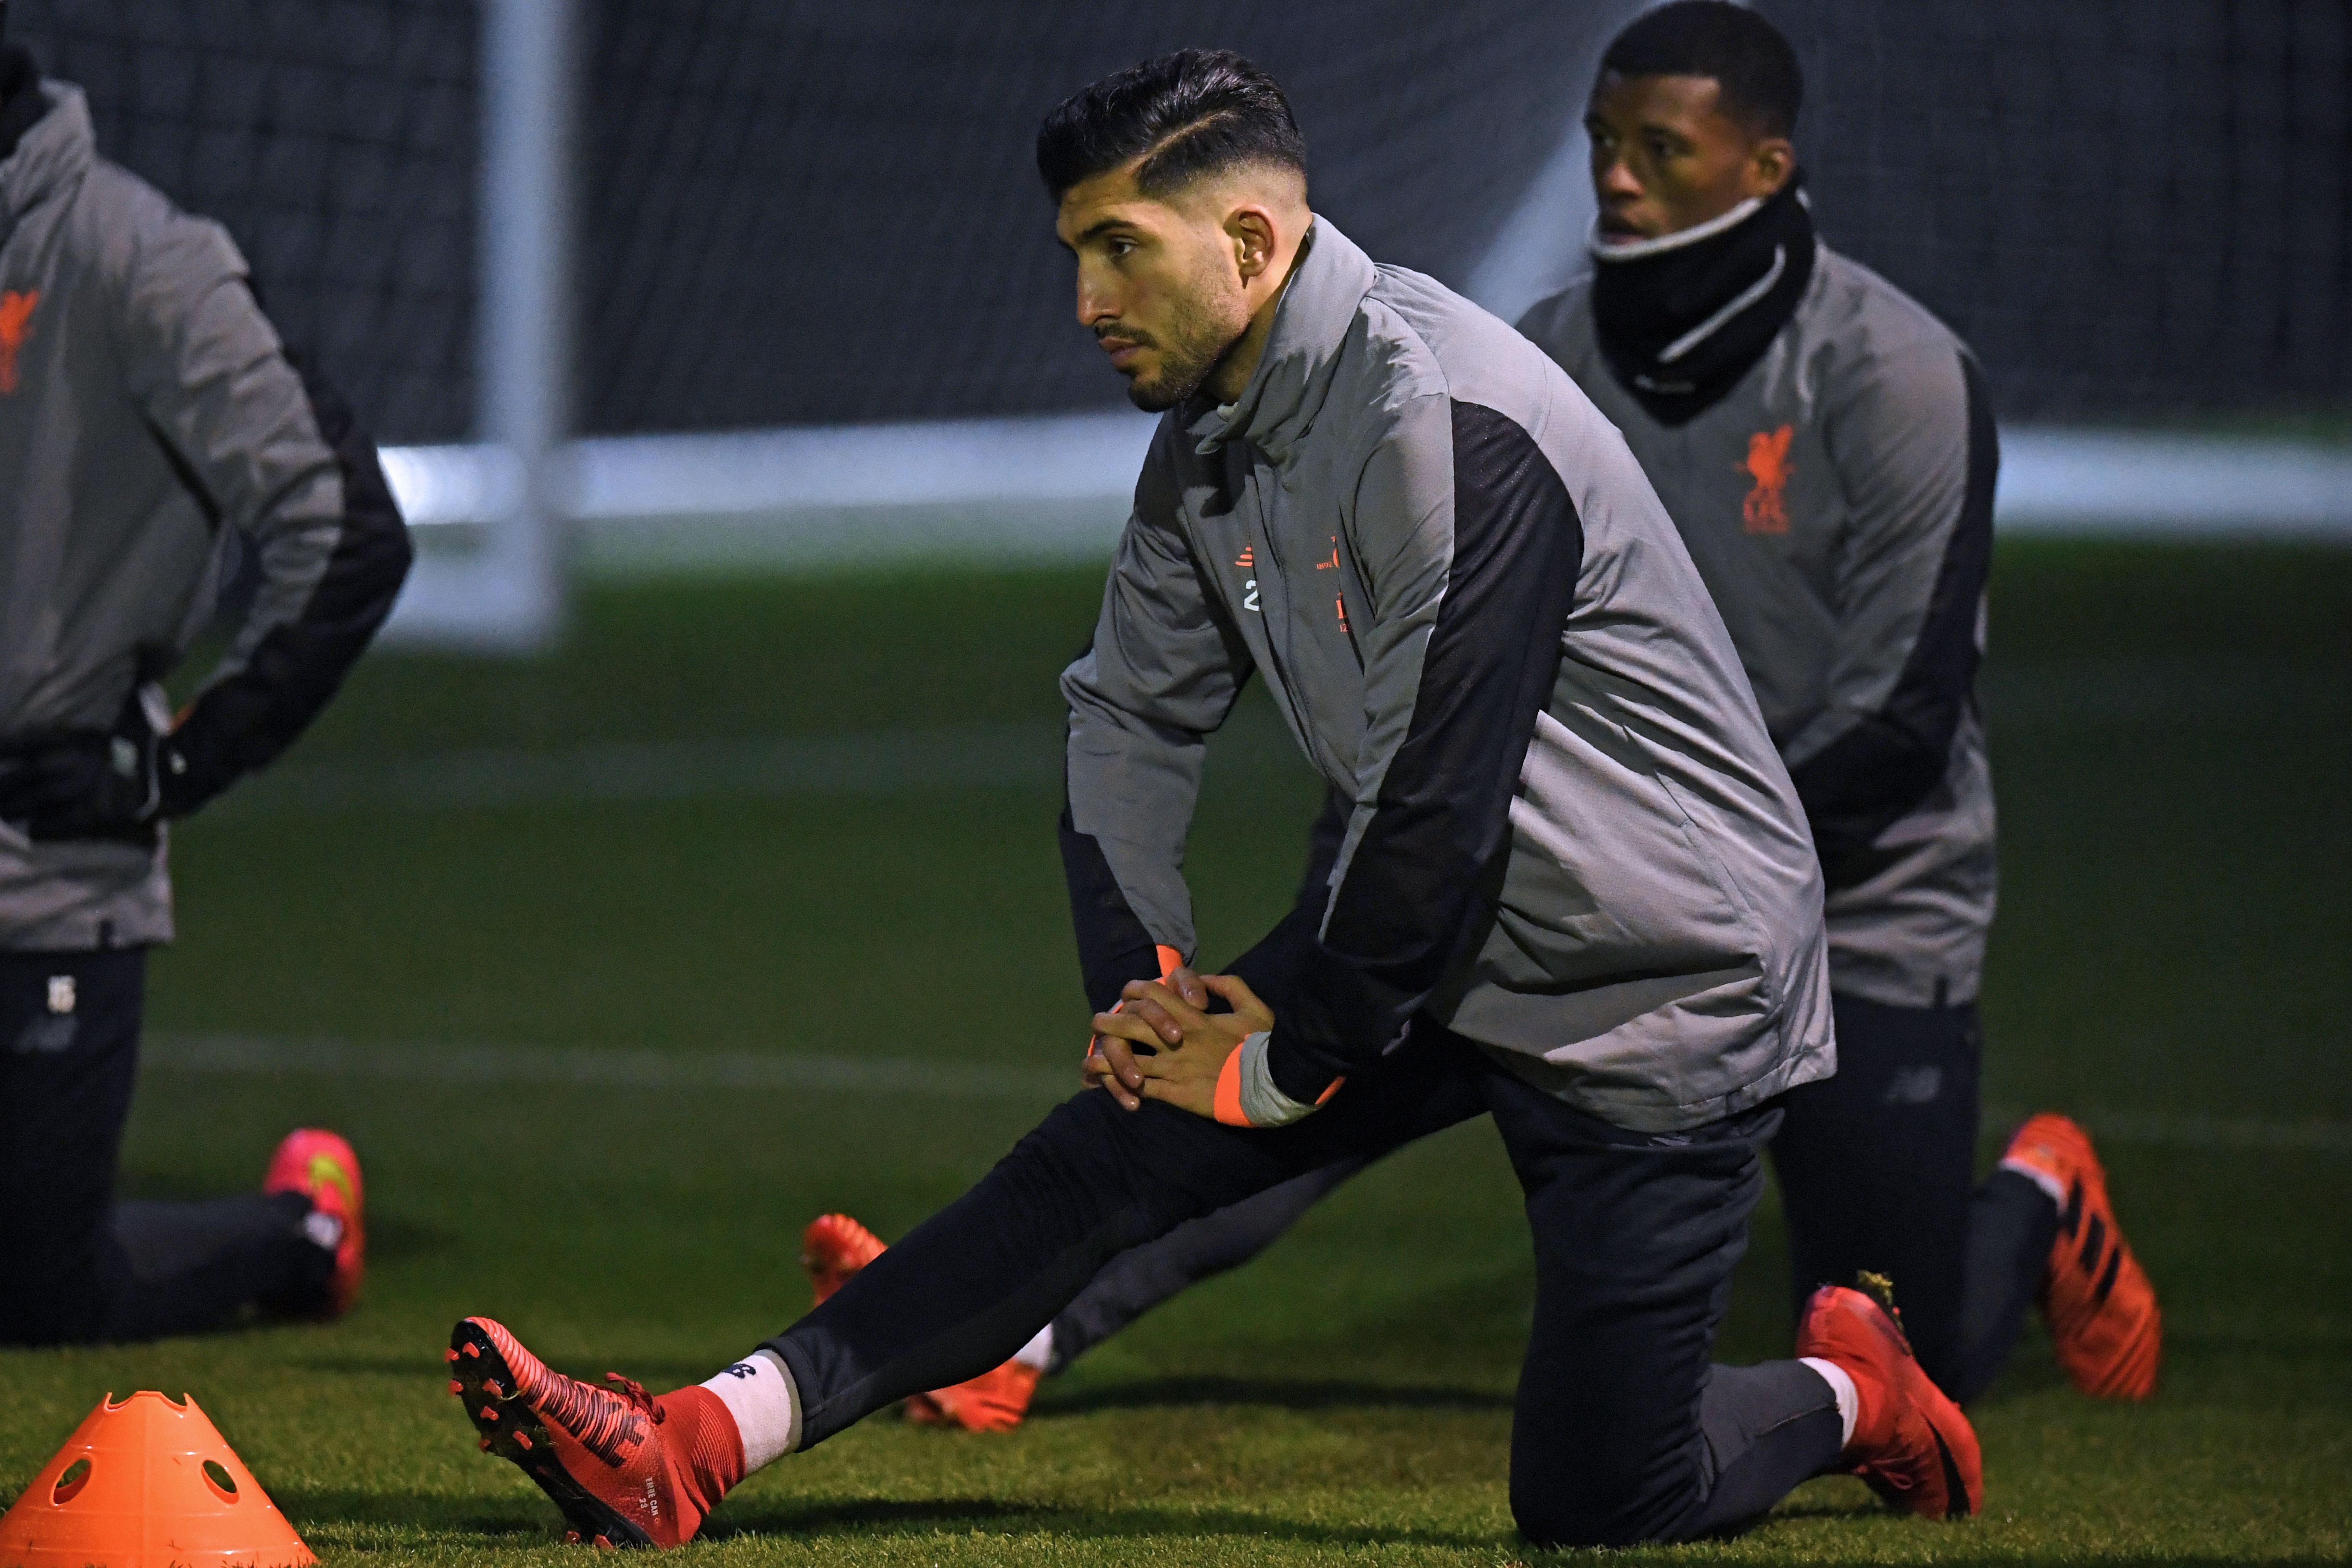 Liverpool's German midfielder Emre Can does stretching exercises during a team training session under the floodlights at their Melwood training complex in Liverpool, north west England, on December 5, 2017, on the eve of their UEFA Champions League group E football match against Spartak Moscow. / AFP PHOTO / Paul ELLIS        (Photo credit should read PAUL ELLIS/AFP/Getty Images)